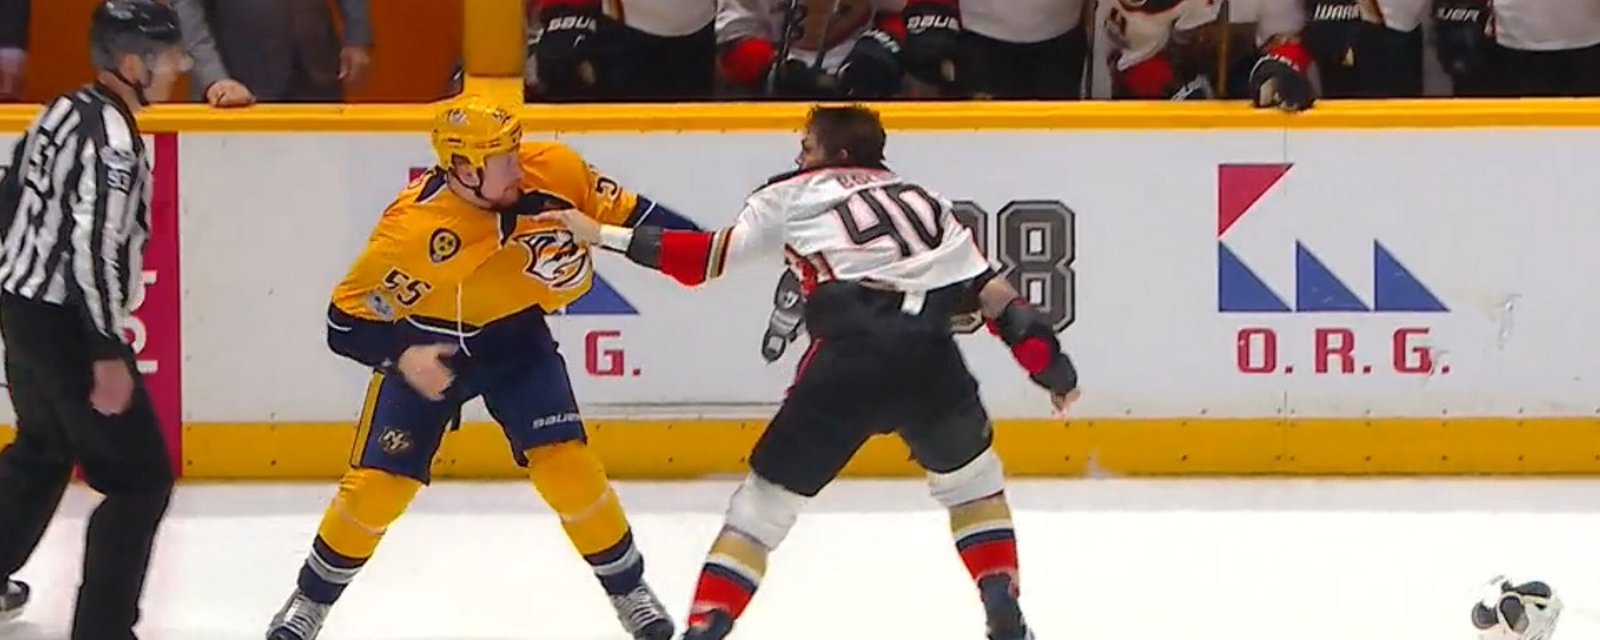 Huge hit leads to an injury and a fight in Game 3!